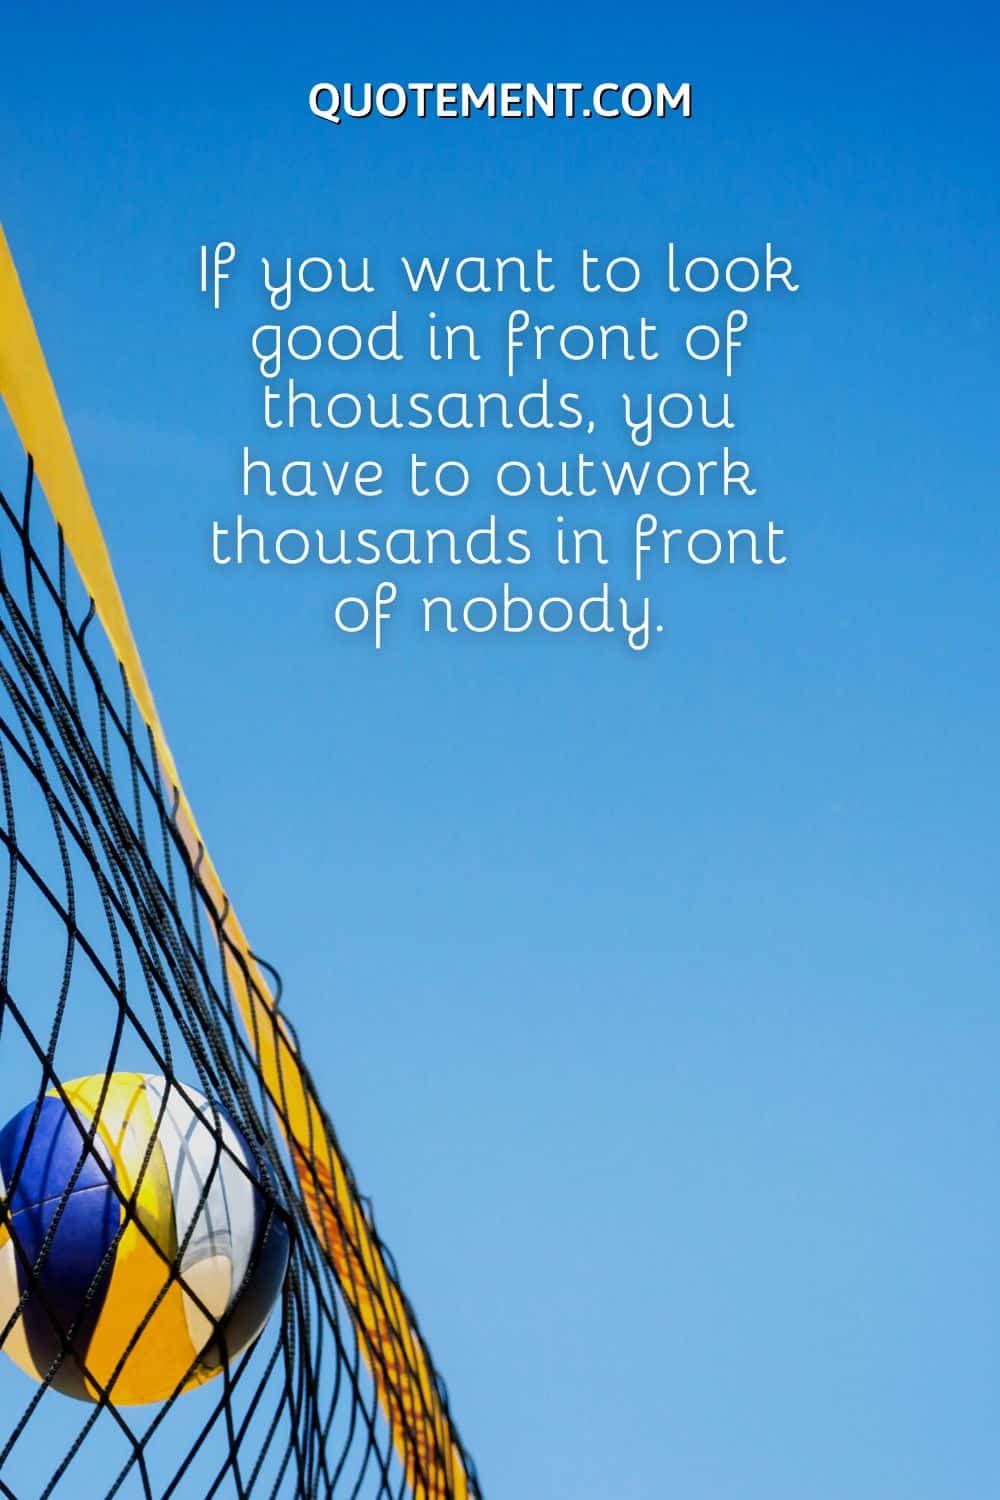 If you want to look good in front of thousands, you have to outwork thousands in front of nobody.